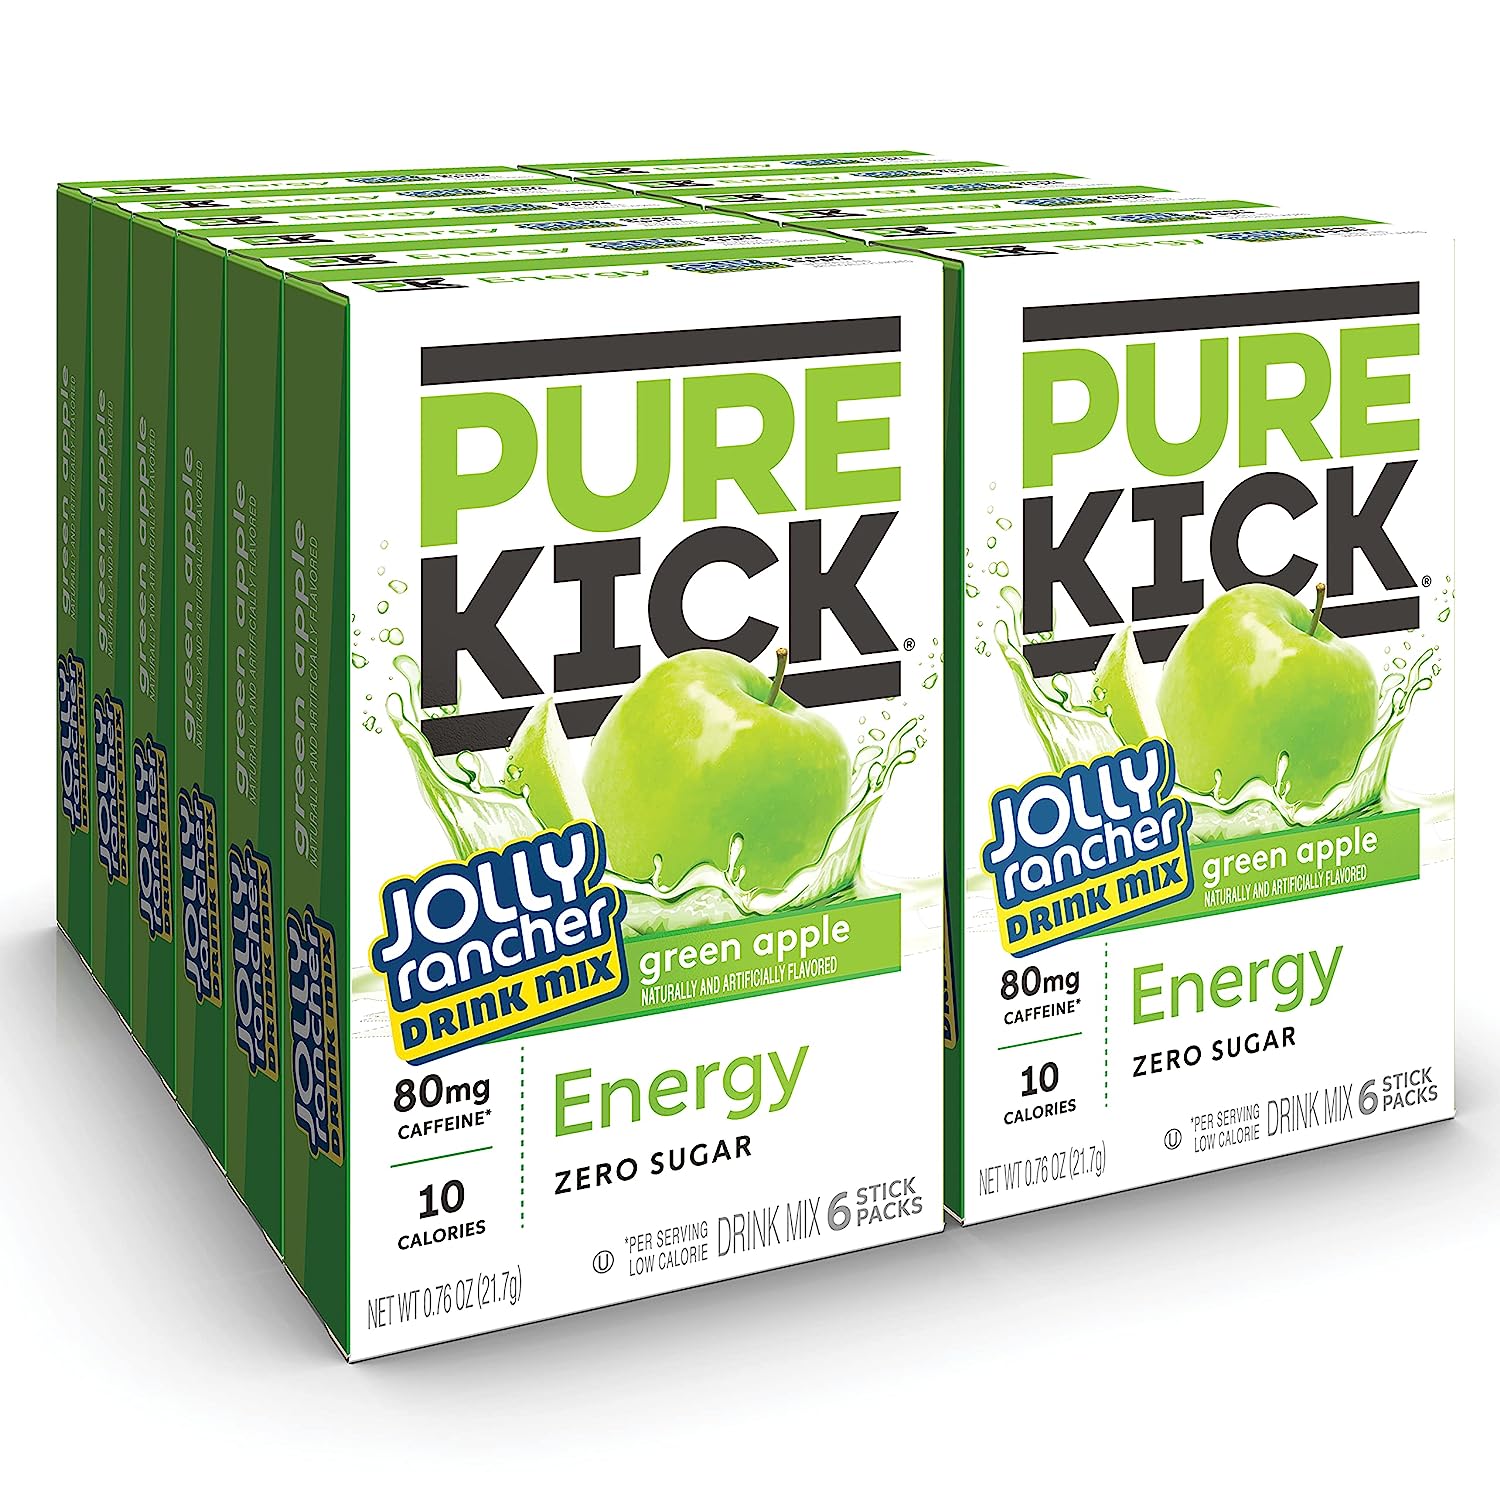 Pure Kick x Jolly Rancher Energy Green Apple Singles to Go (260.4g) (12 Pack)